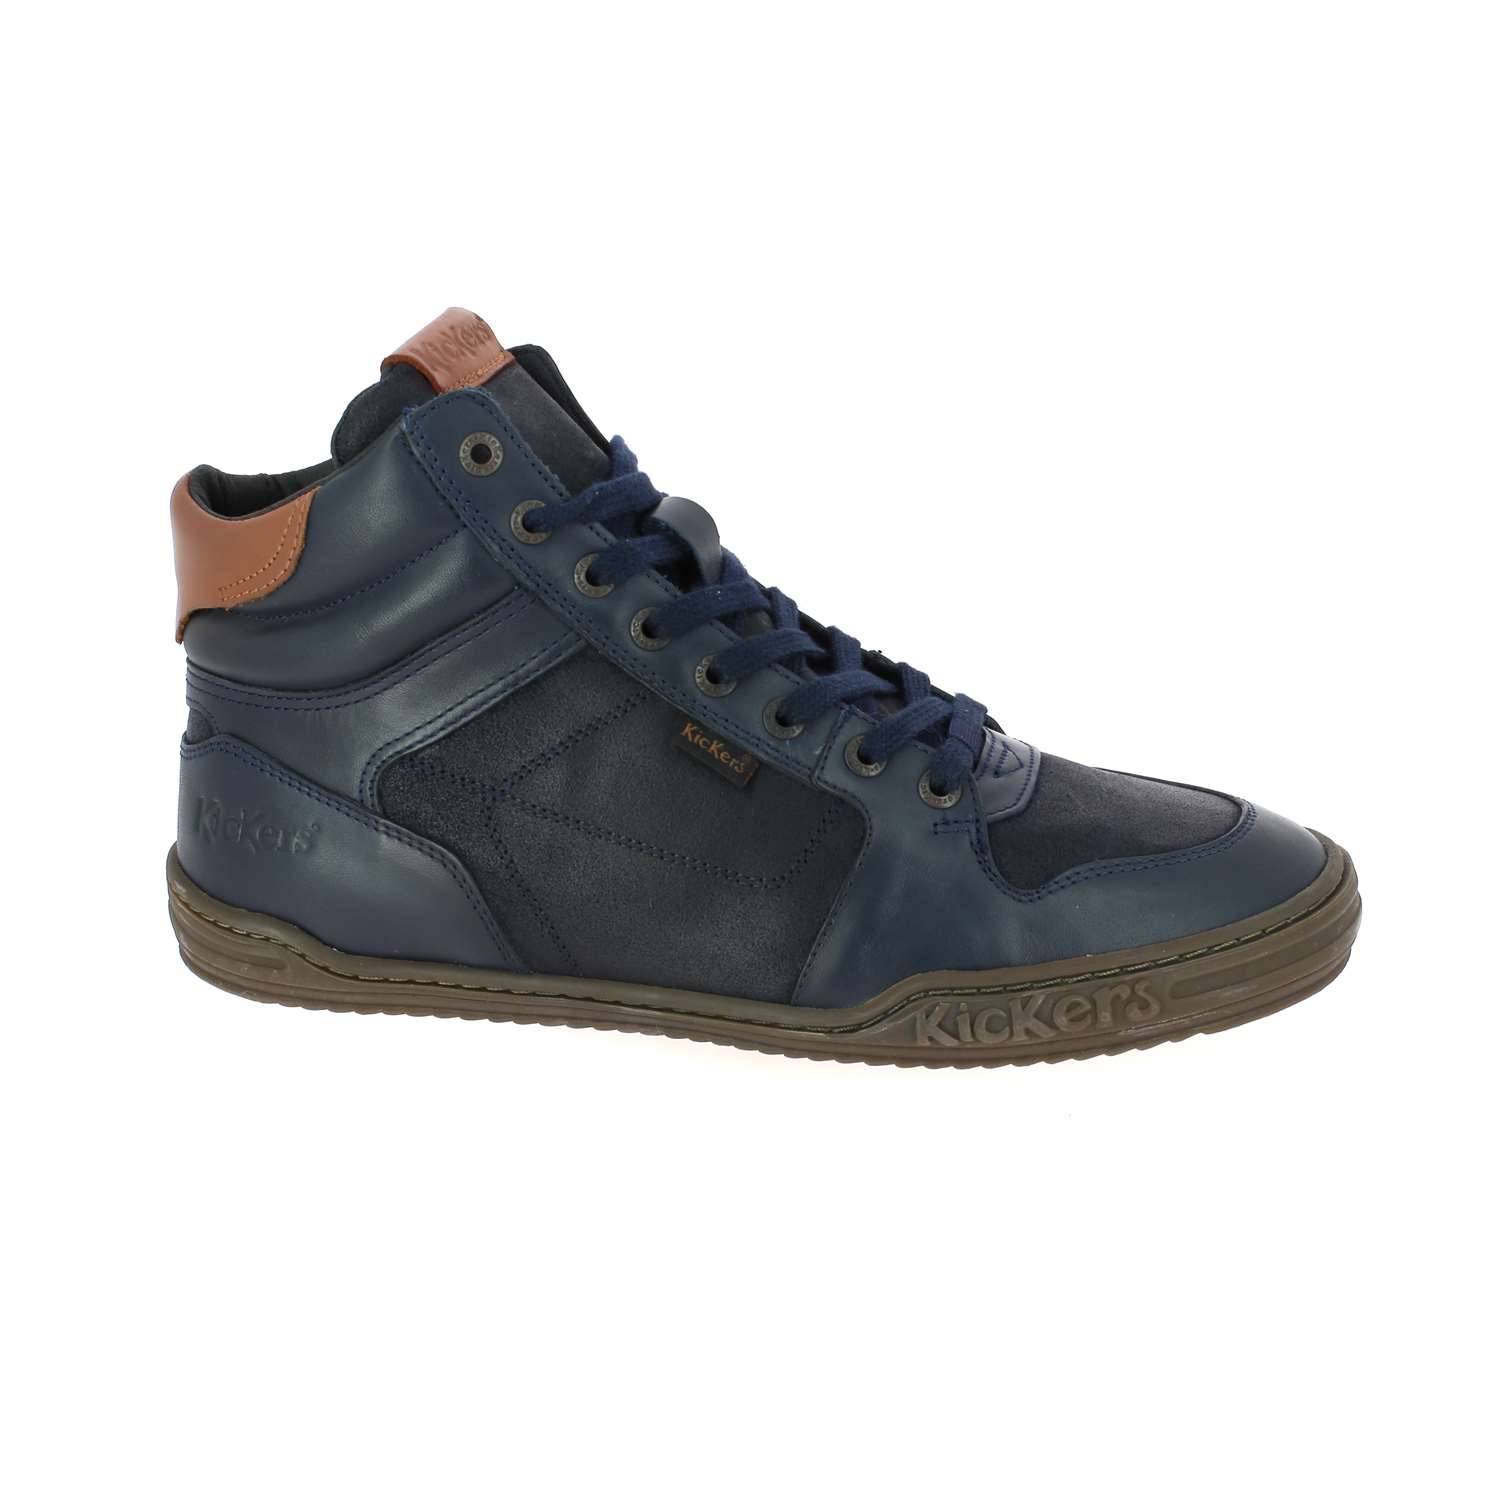 02 - JUNGLEHIGH - KICKERS - Chaussures à lacets - Cuir